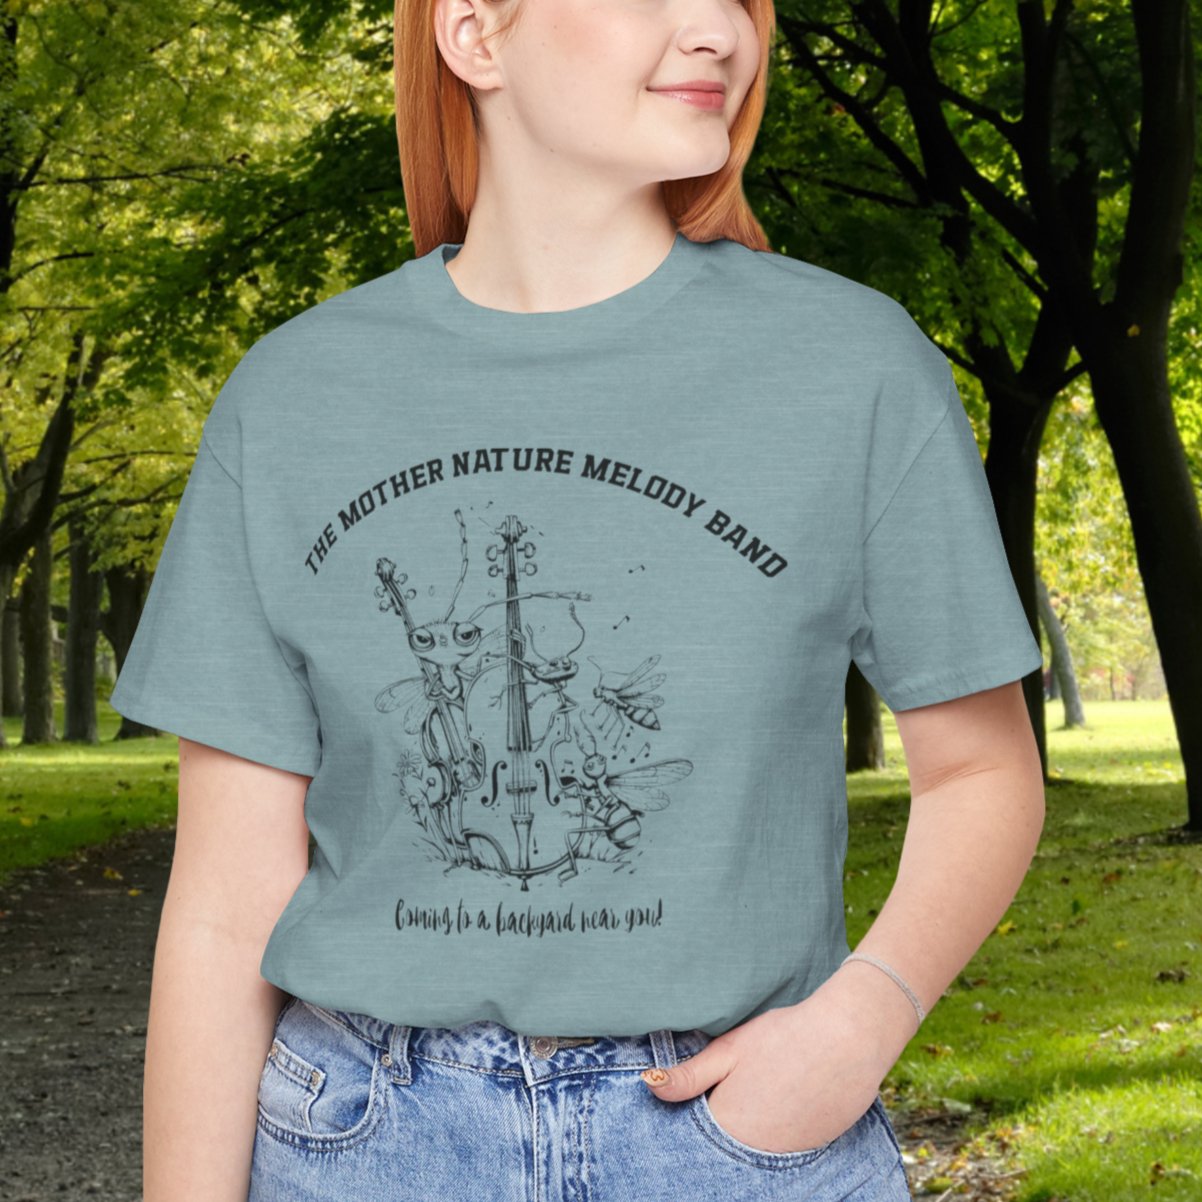 Cute Whimsical Meadow Insect Band T-shirt! "The Mother Nature Melody Band", Cartoon - FlooredByArt